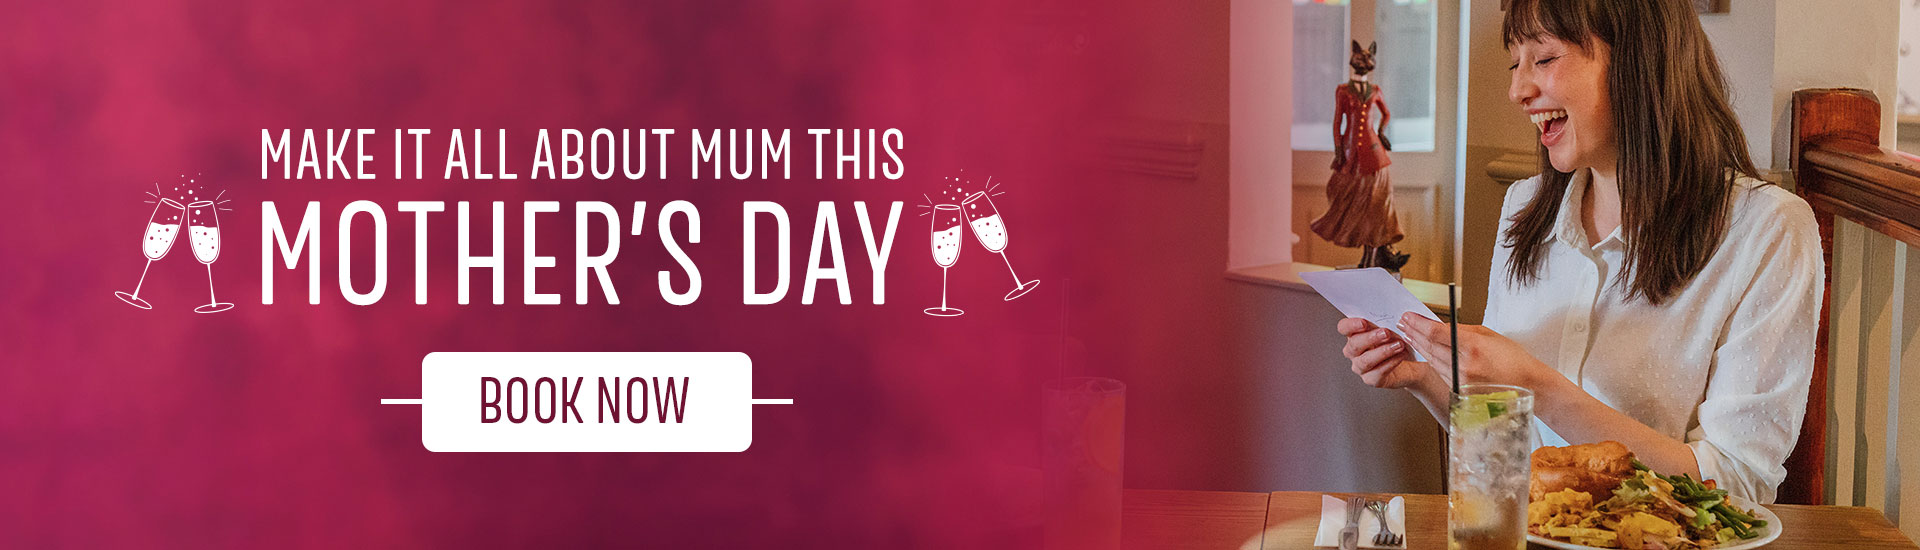 Mother’s Day in Darlington, Mother’s Day 2023, Mother’s Day at Toby Carvery